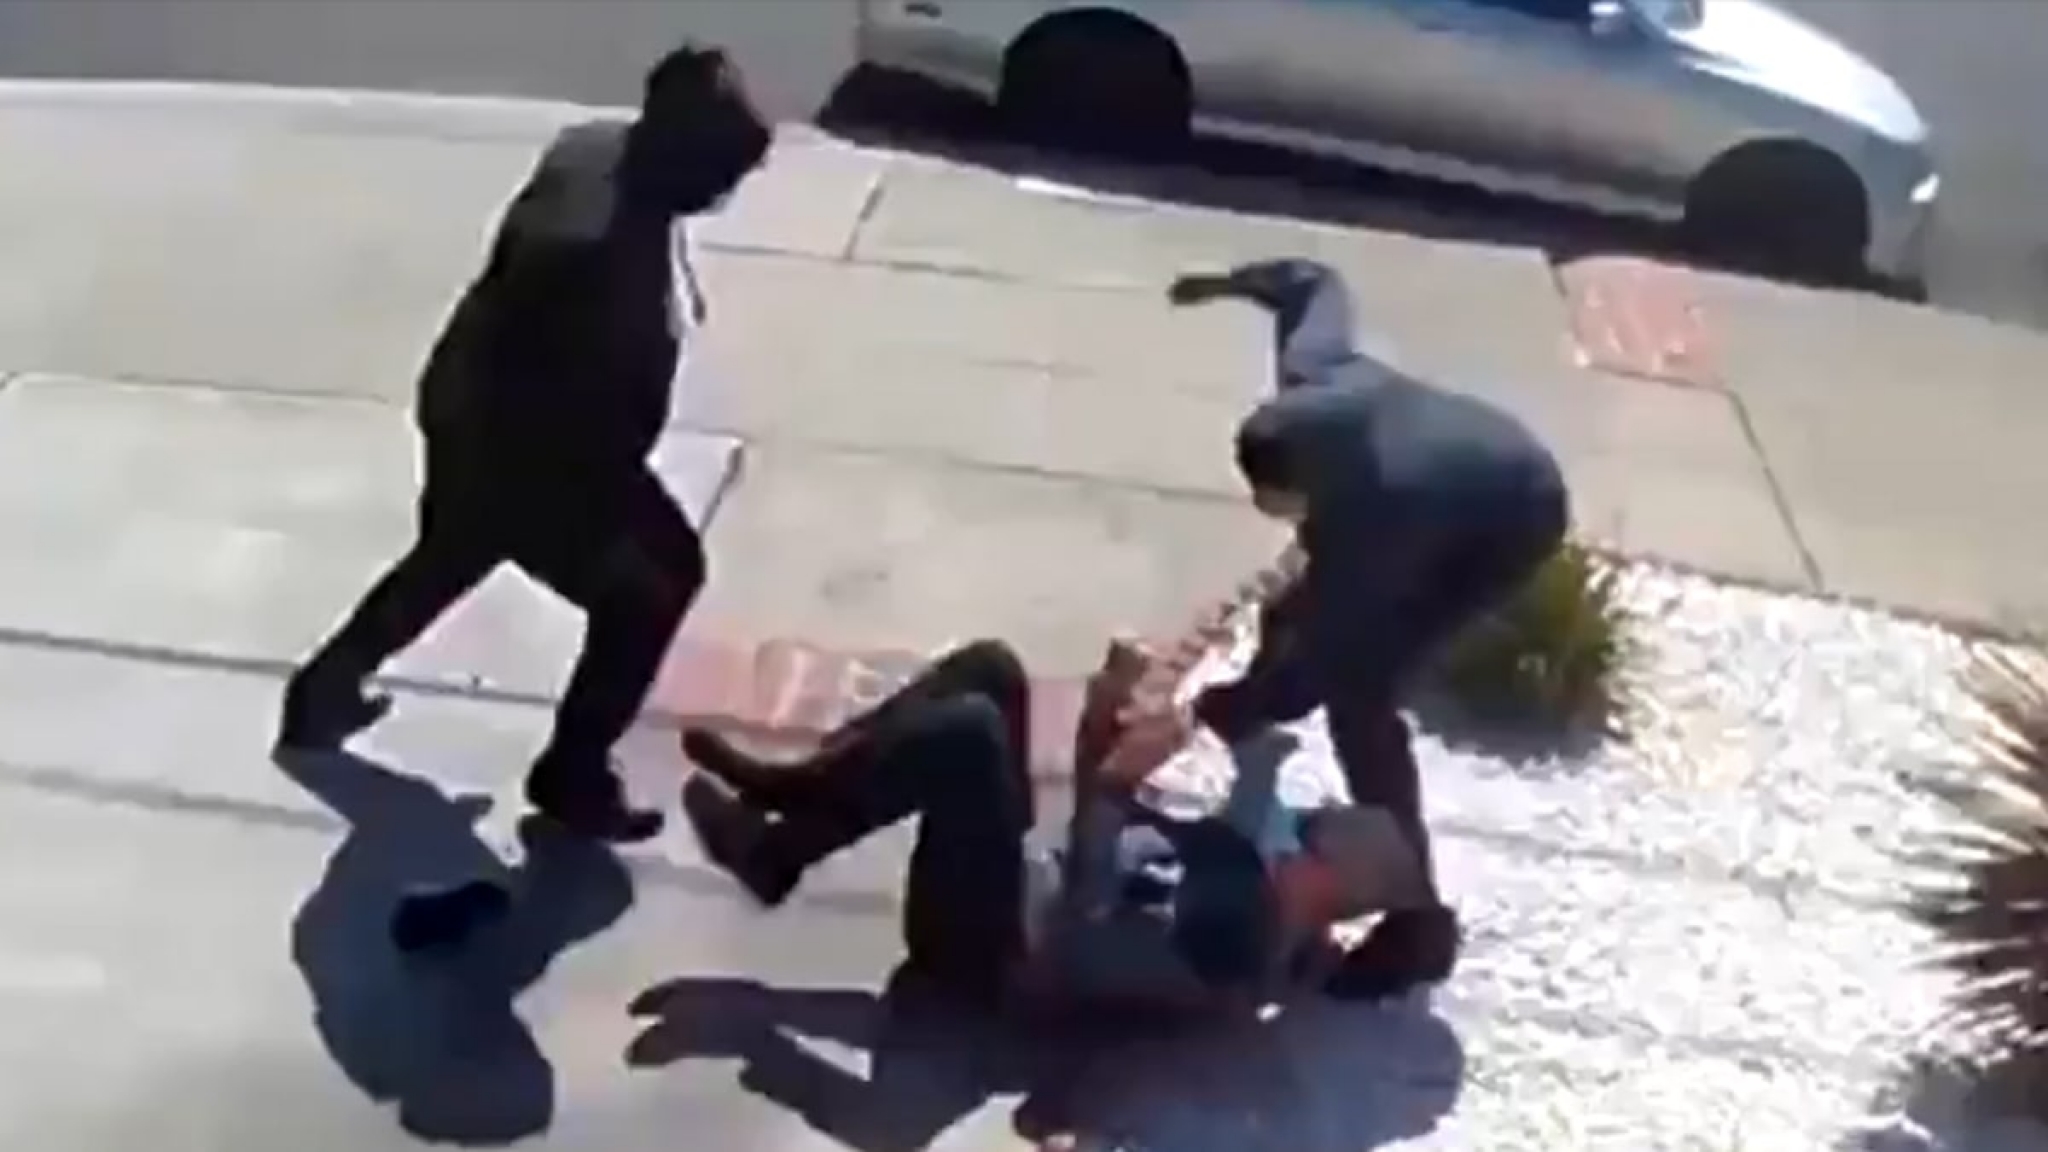 Elderly Asian Man Cries Out for Help While Bay Area Teens Attack Him